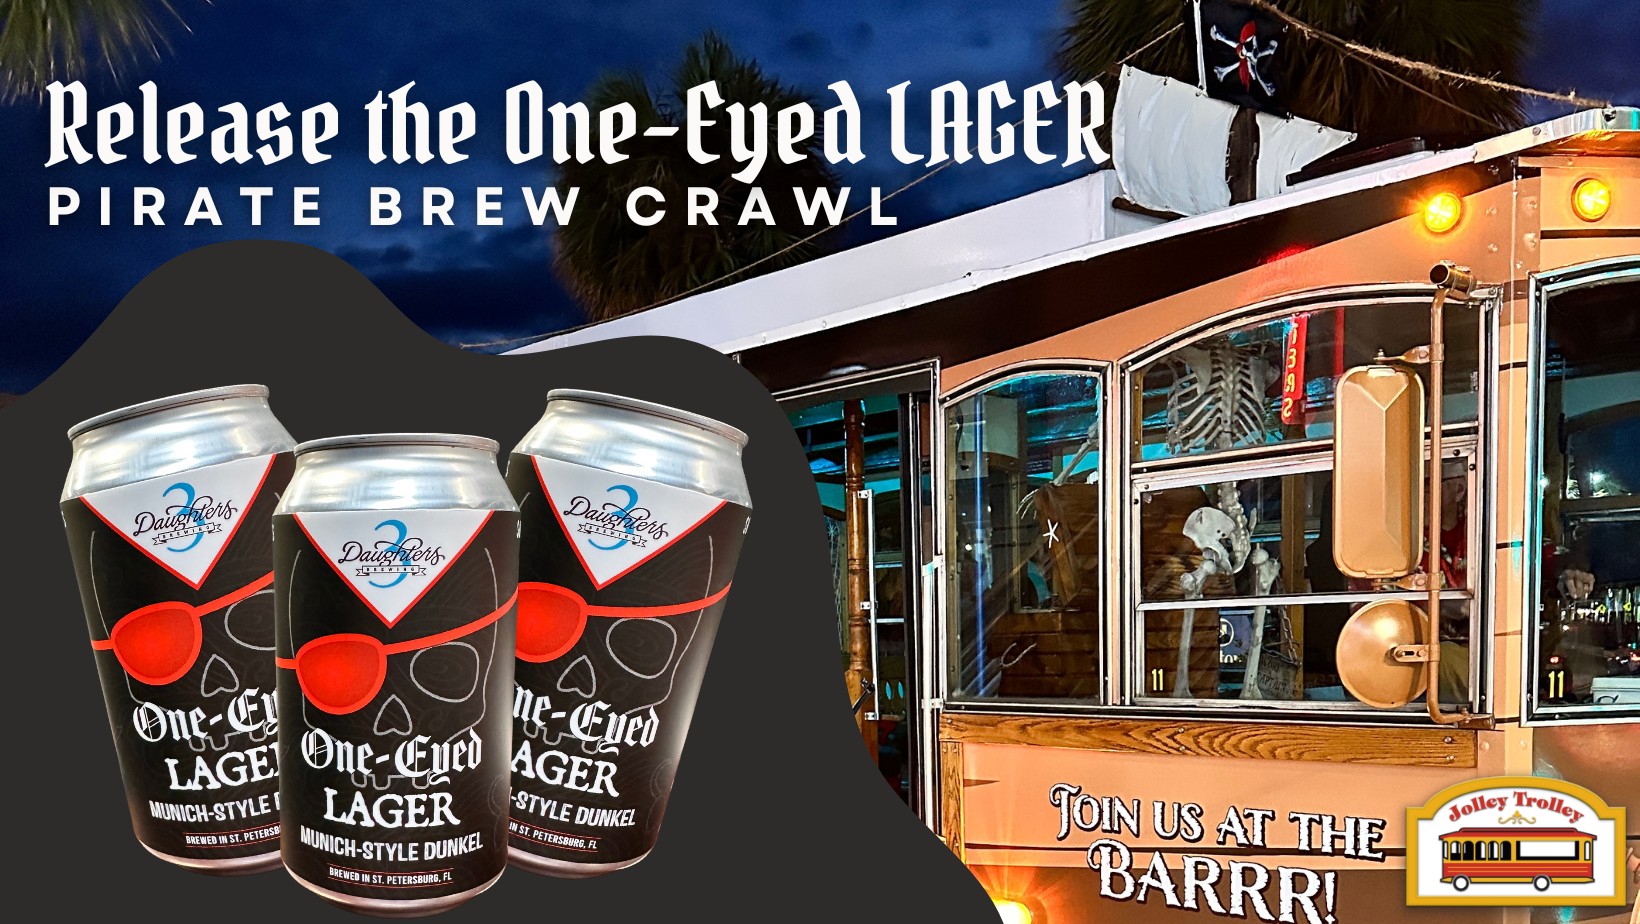 Release the One-Eyed Lager Pirate Brew Crawl!